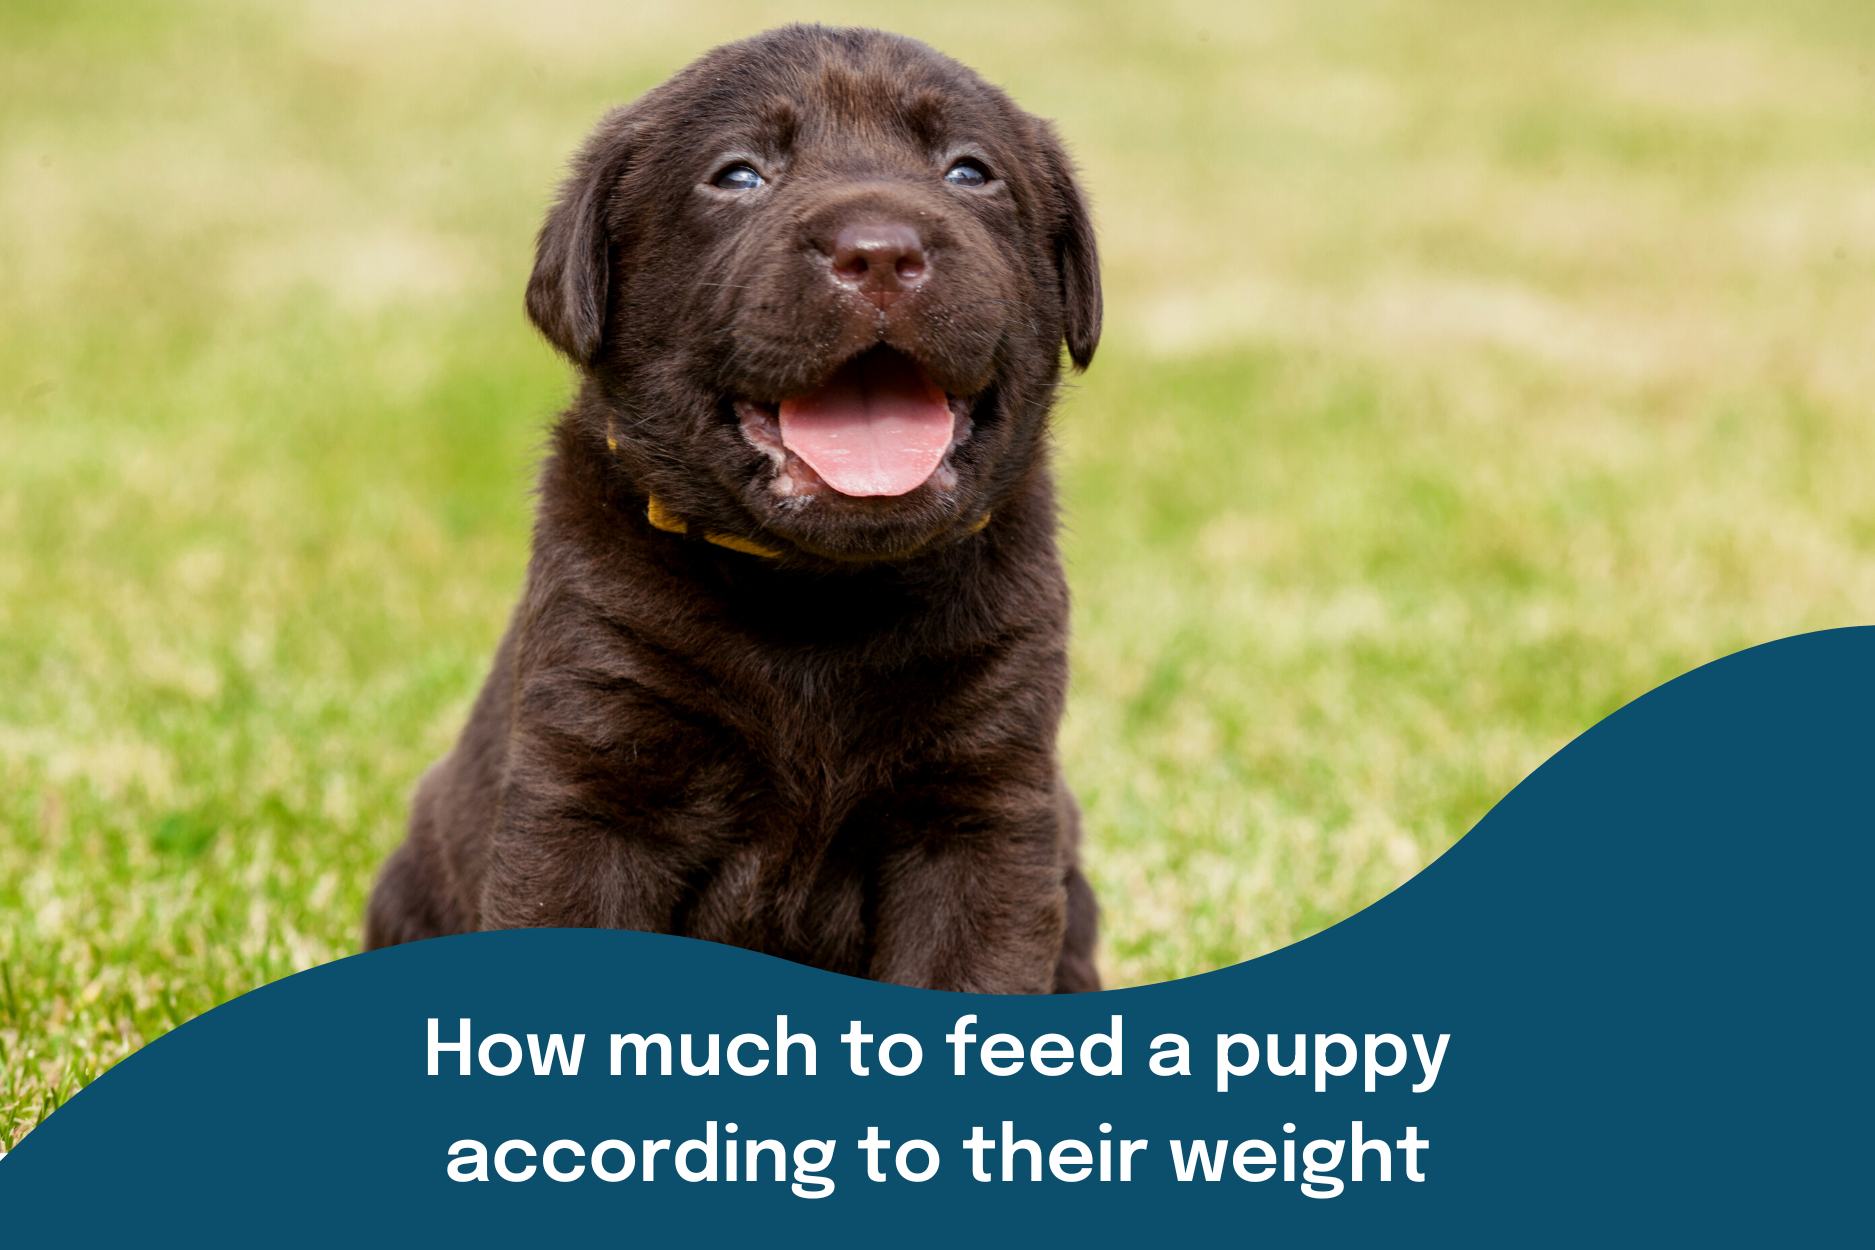 Young puppy looking happy with overlay text saying how much to feed a puppy according to their weight